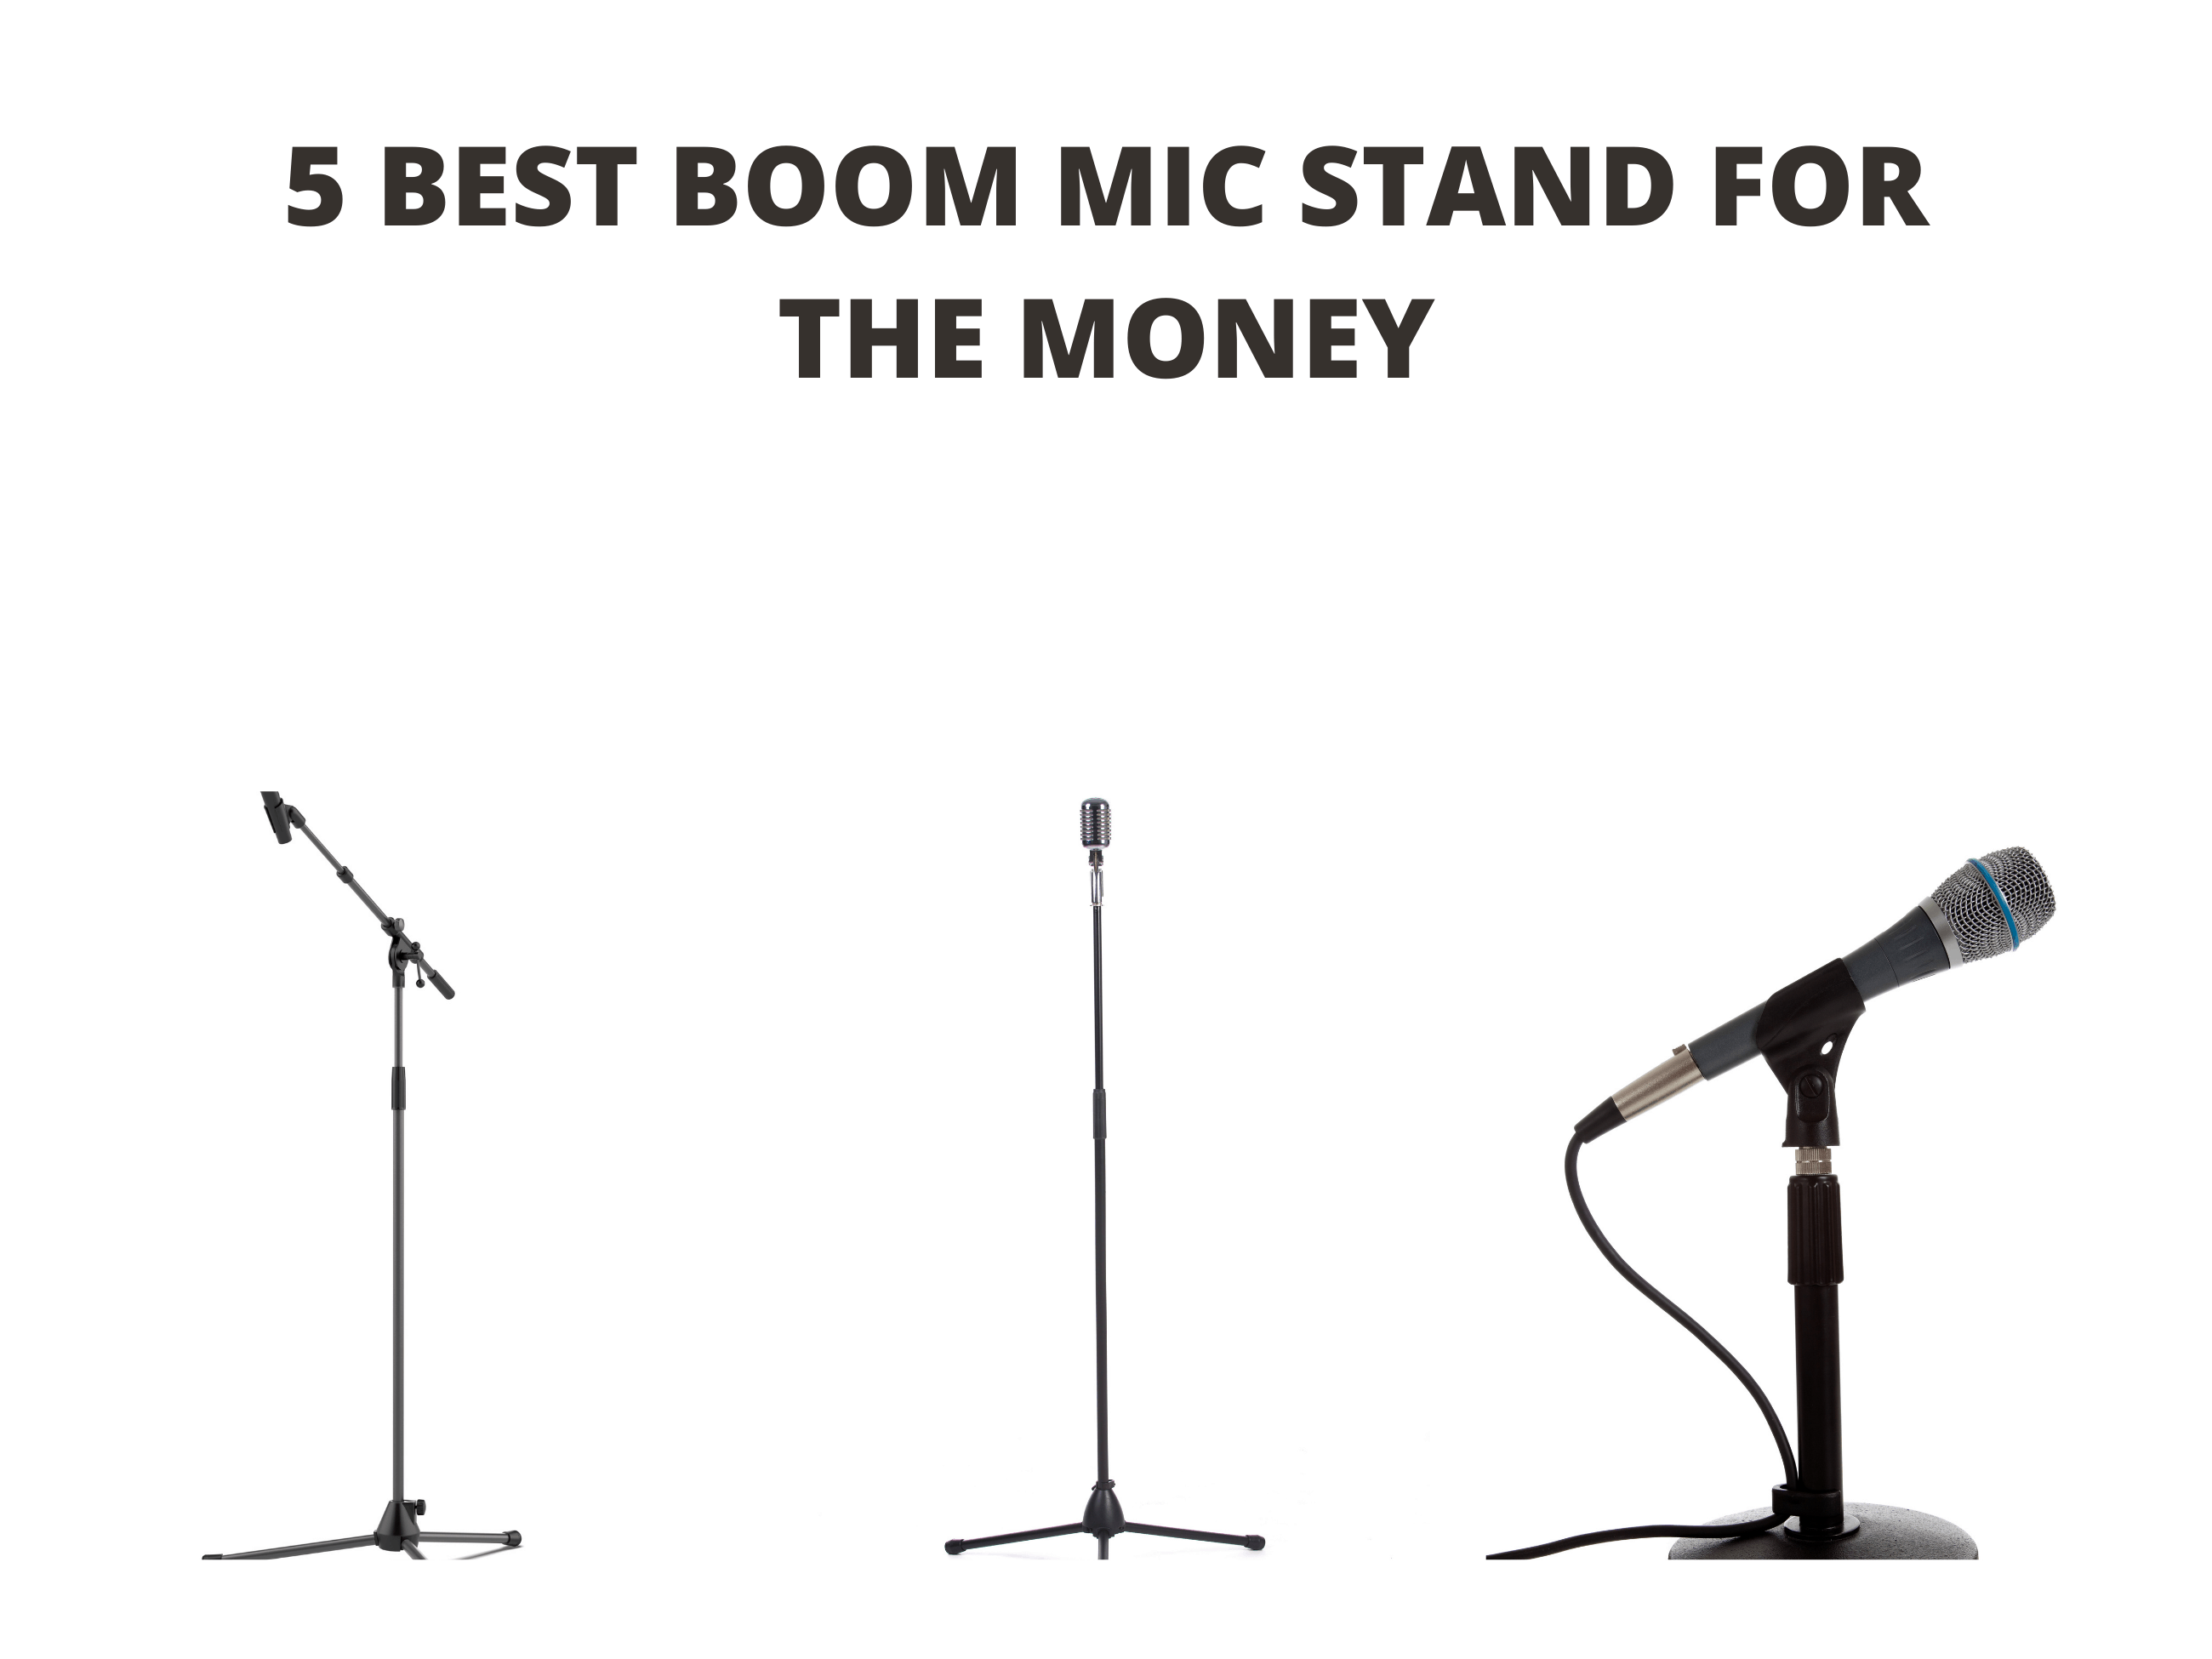 5 Best Boom Mic Stand for the Money